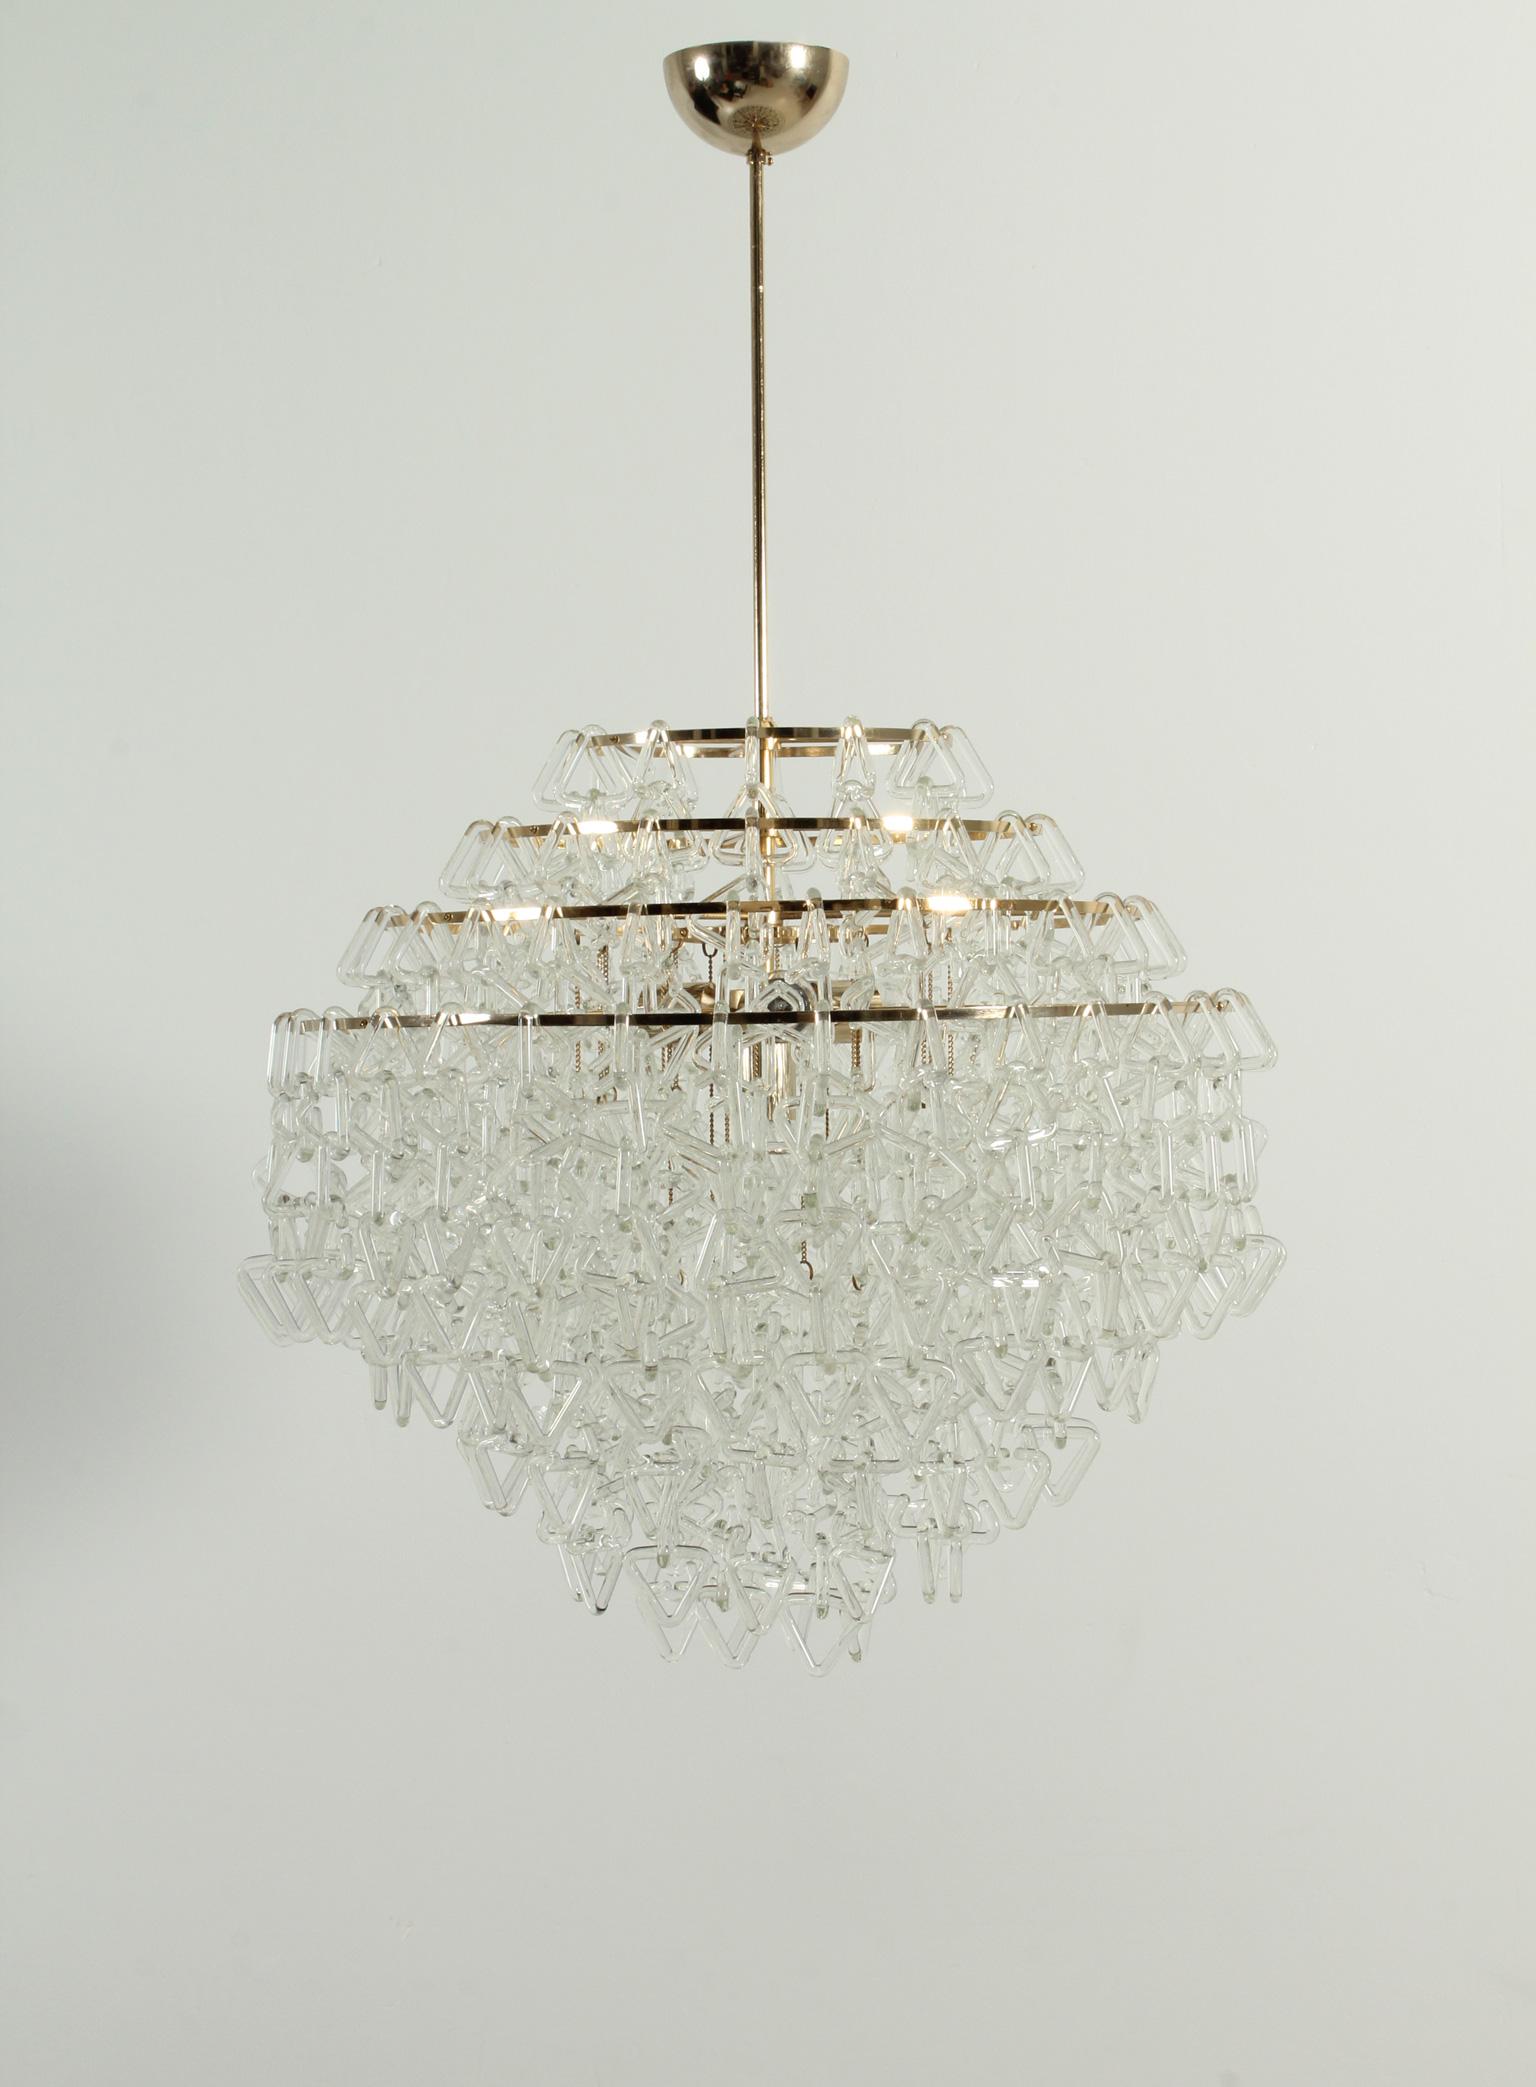 Exceptional Italian chandelier from 1970's, in the manner of Angelo Mangiarotti works. Made of hundreds of Murano glass pieces interlaced with triangular form and brass structure with four lights.